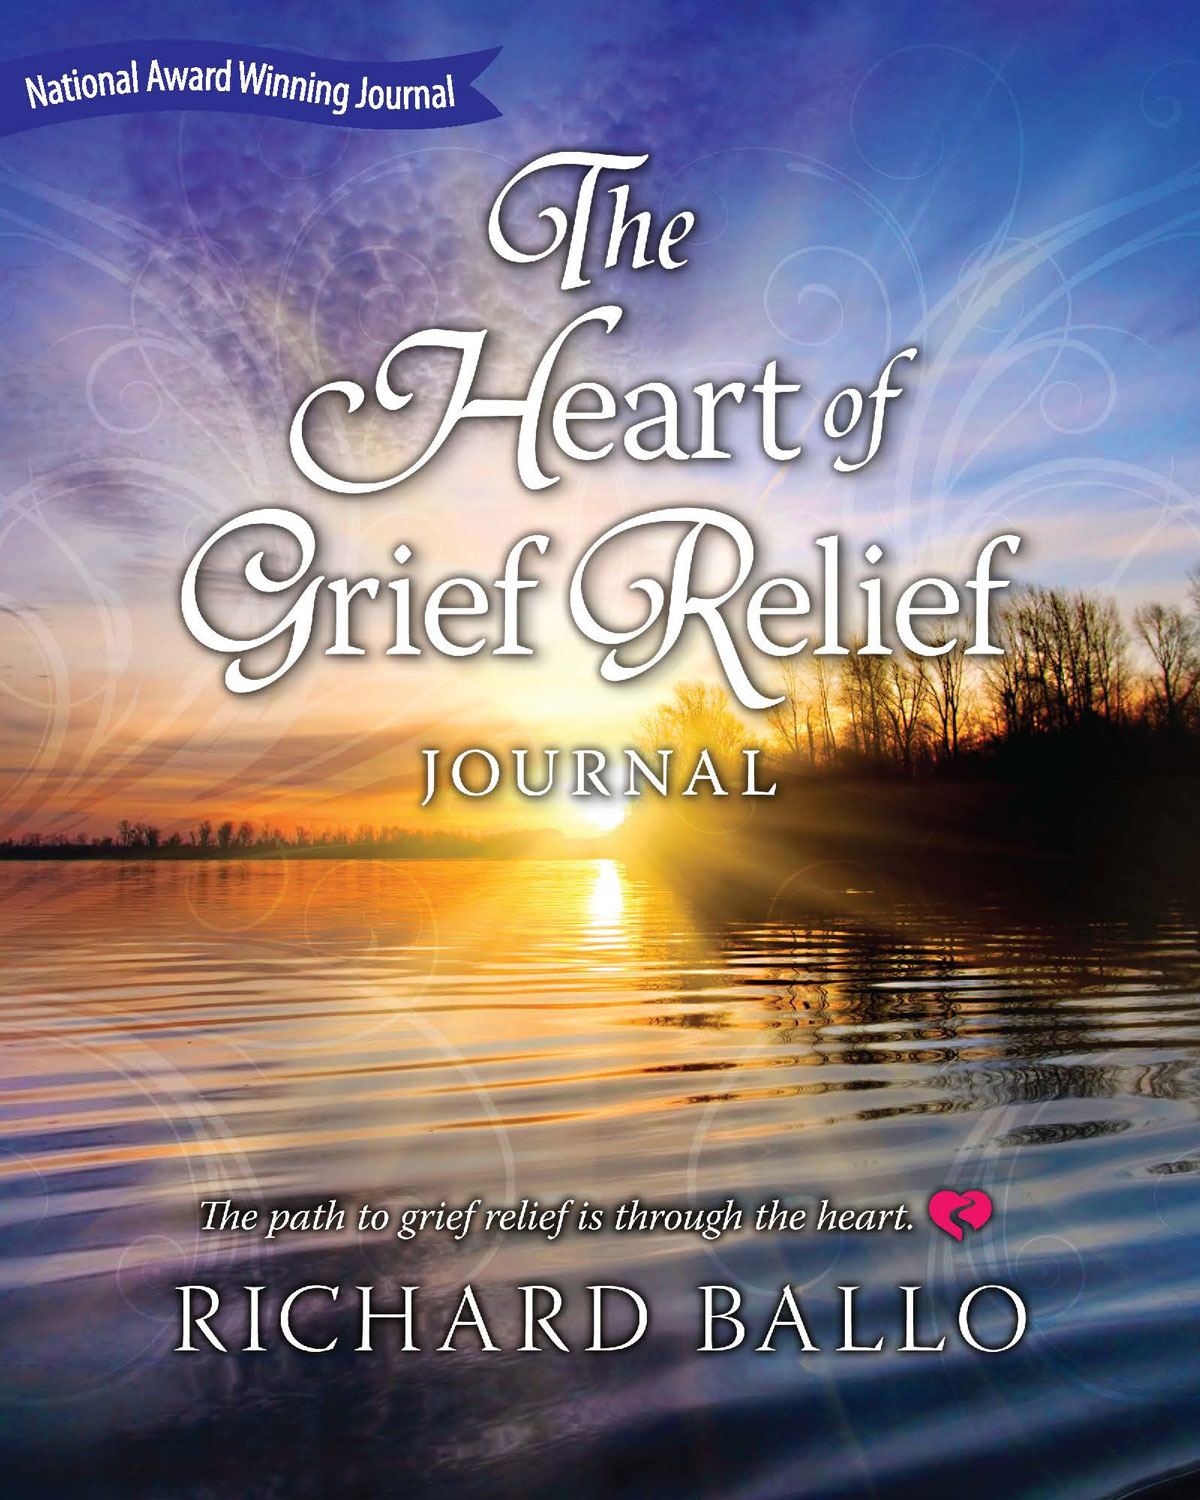 The Heart of Grief Relief Journal by Richard Ballo